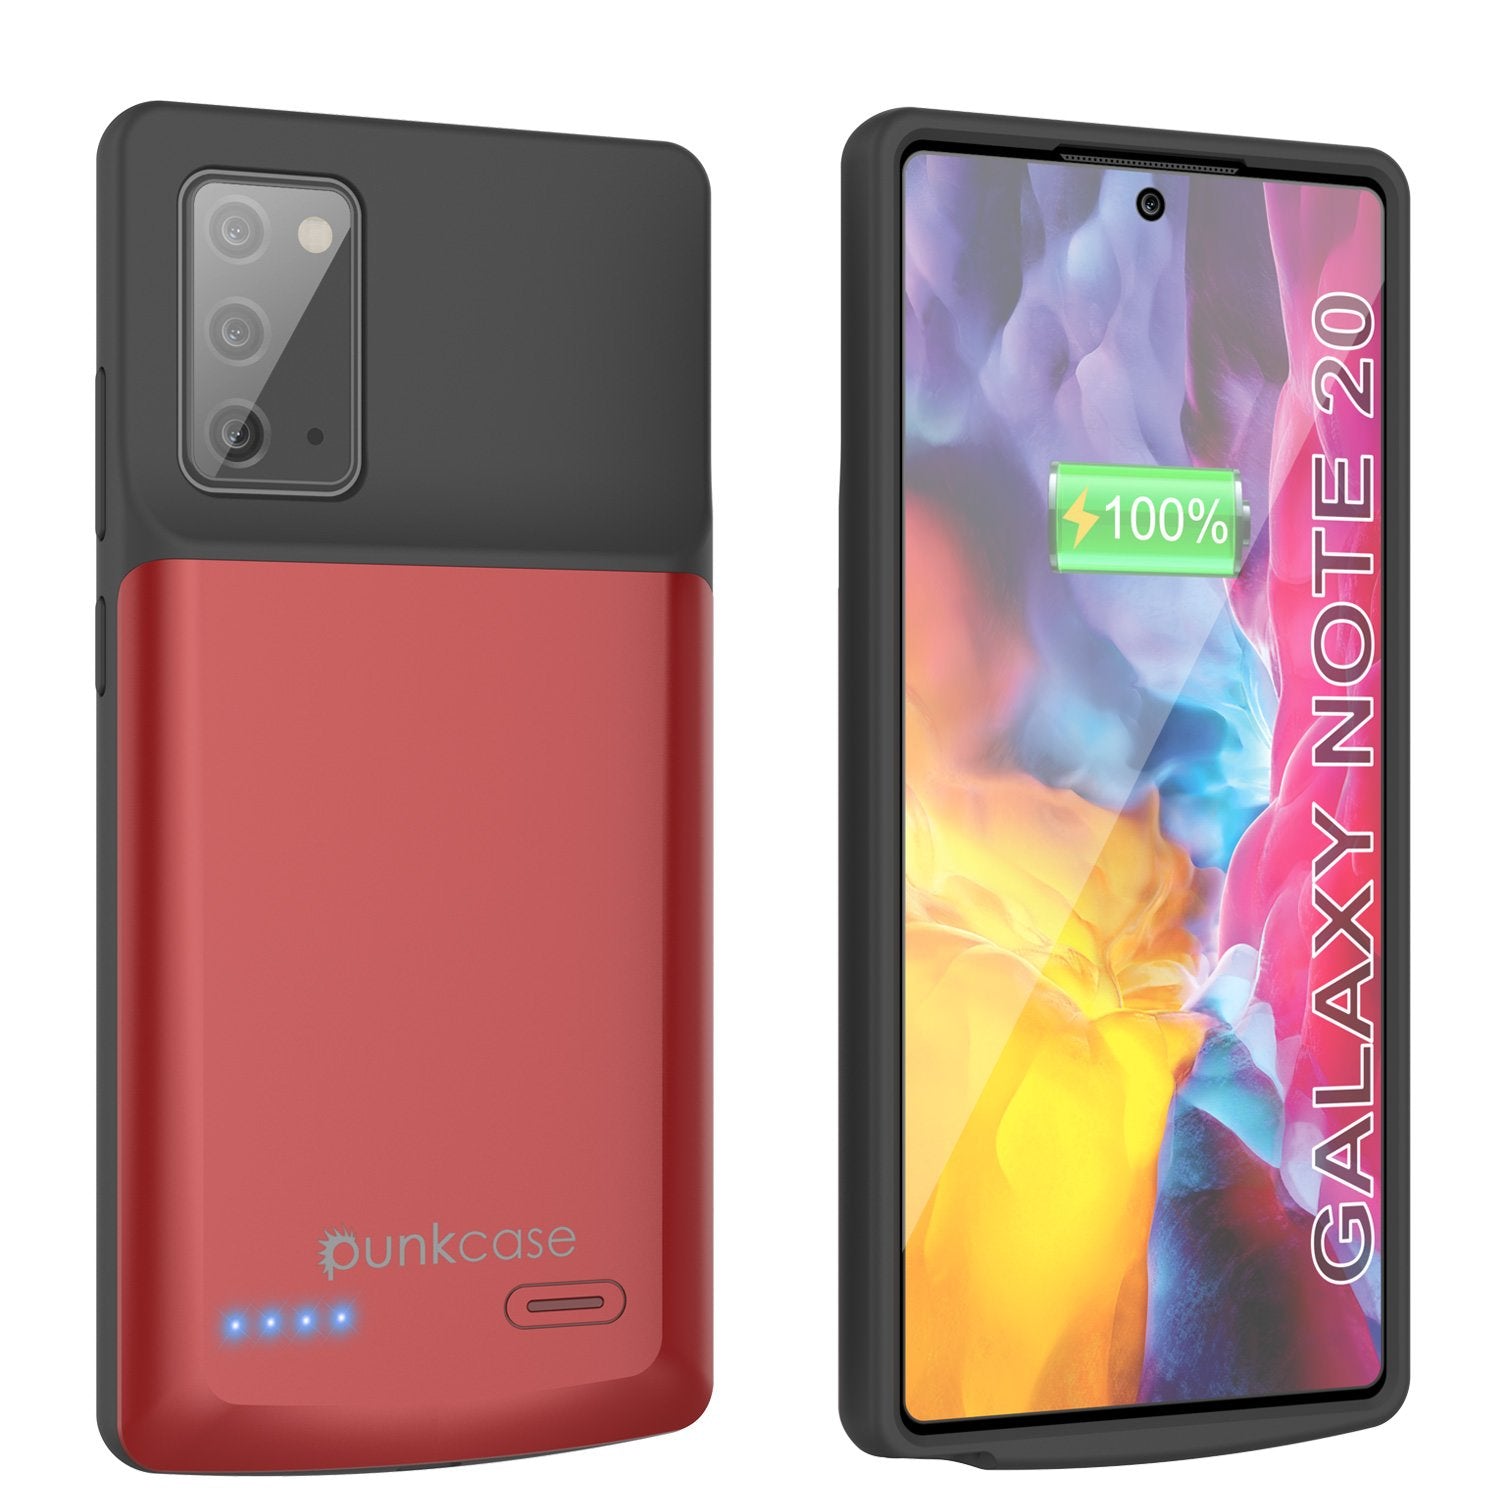 Galaxy Note 20 6000mAH Battery Charger Slim Case [Red] (Color in image: Red)